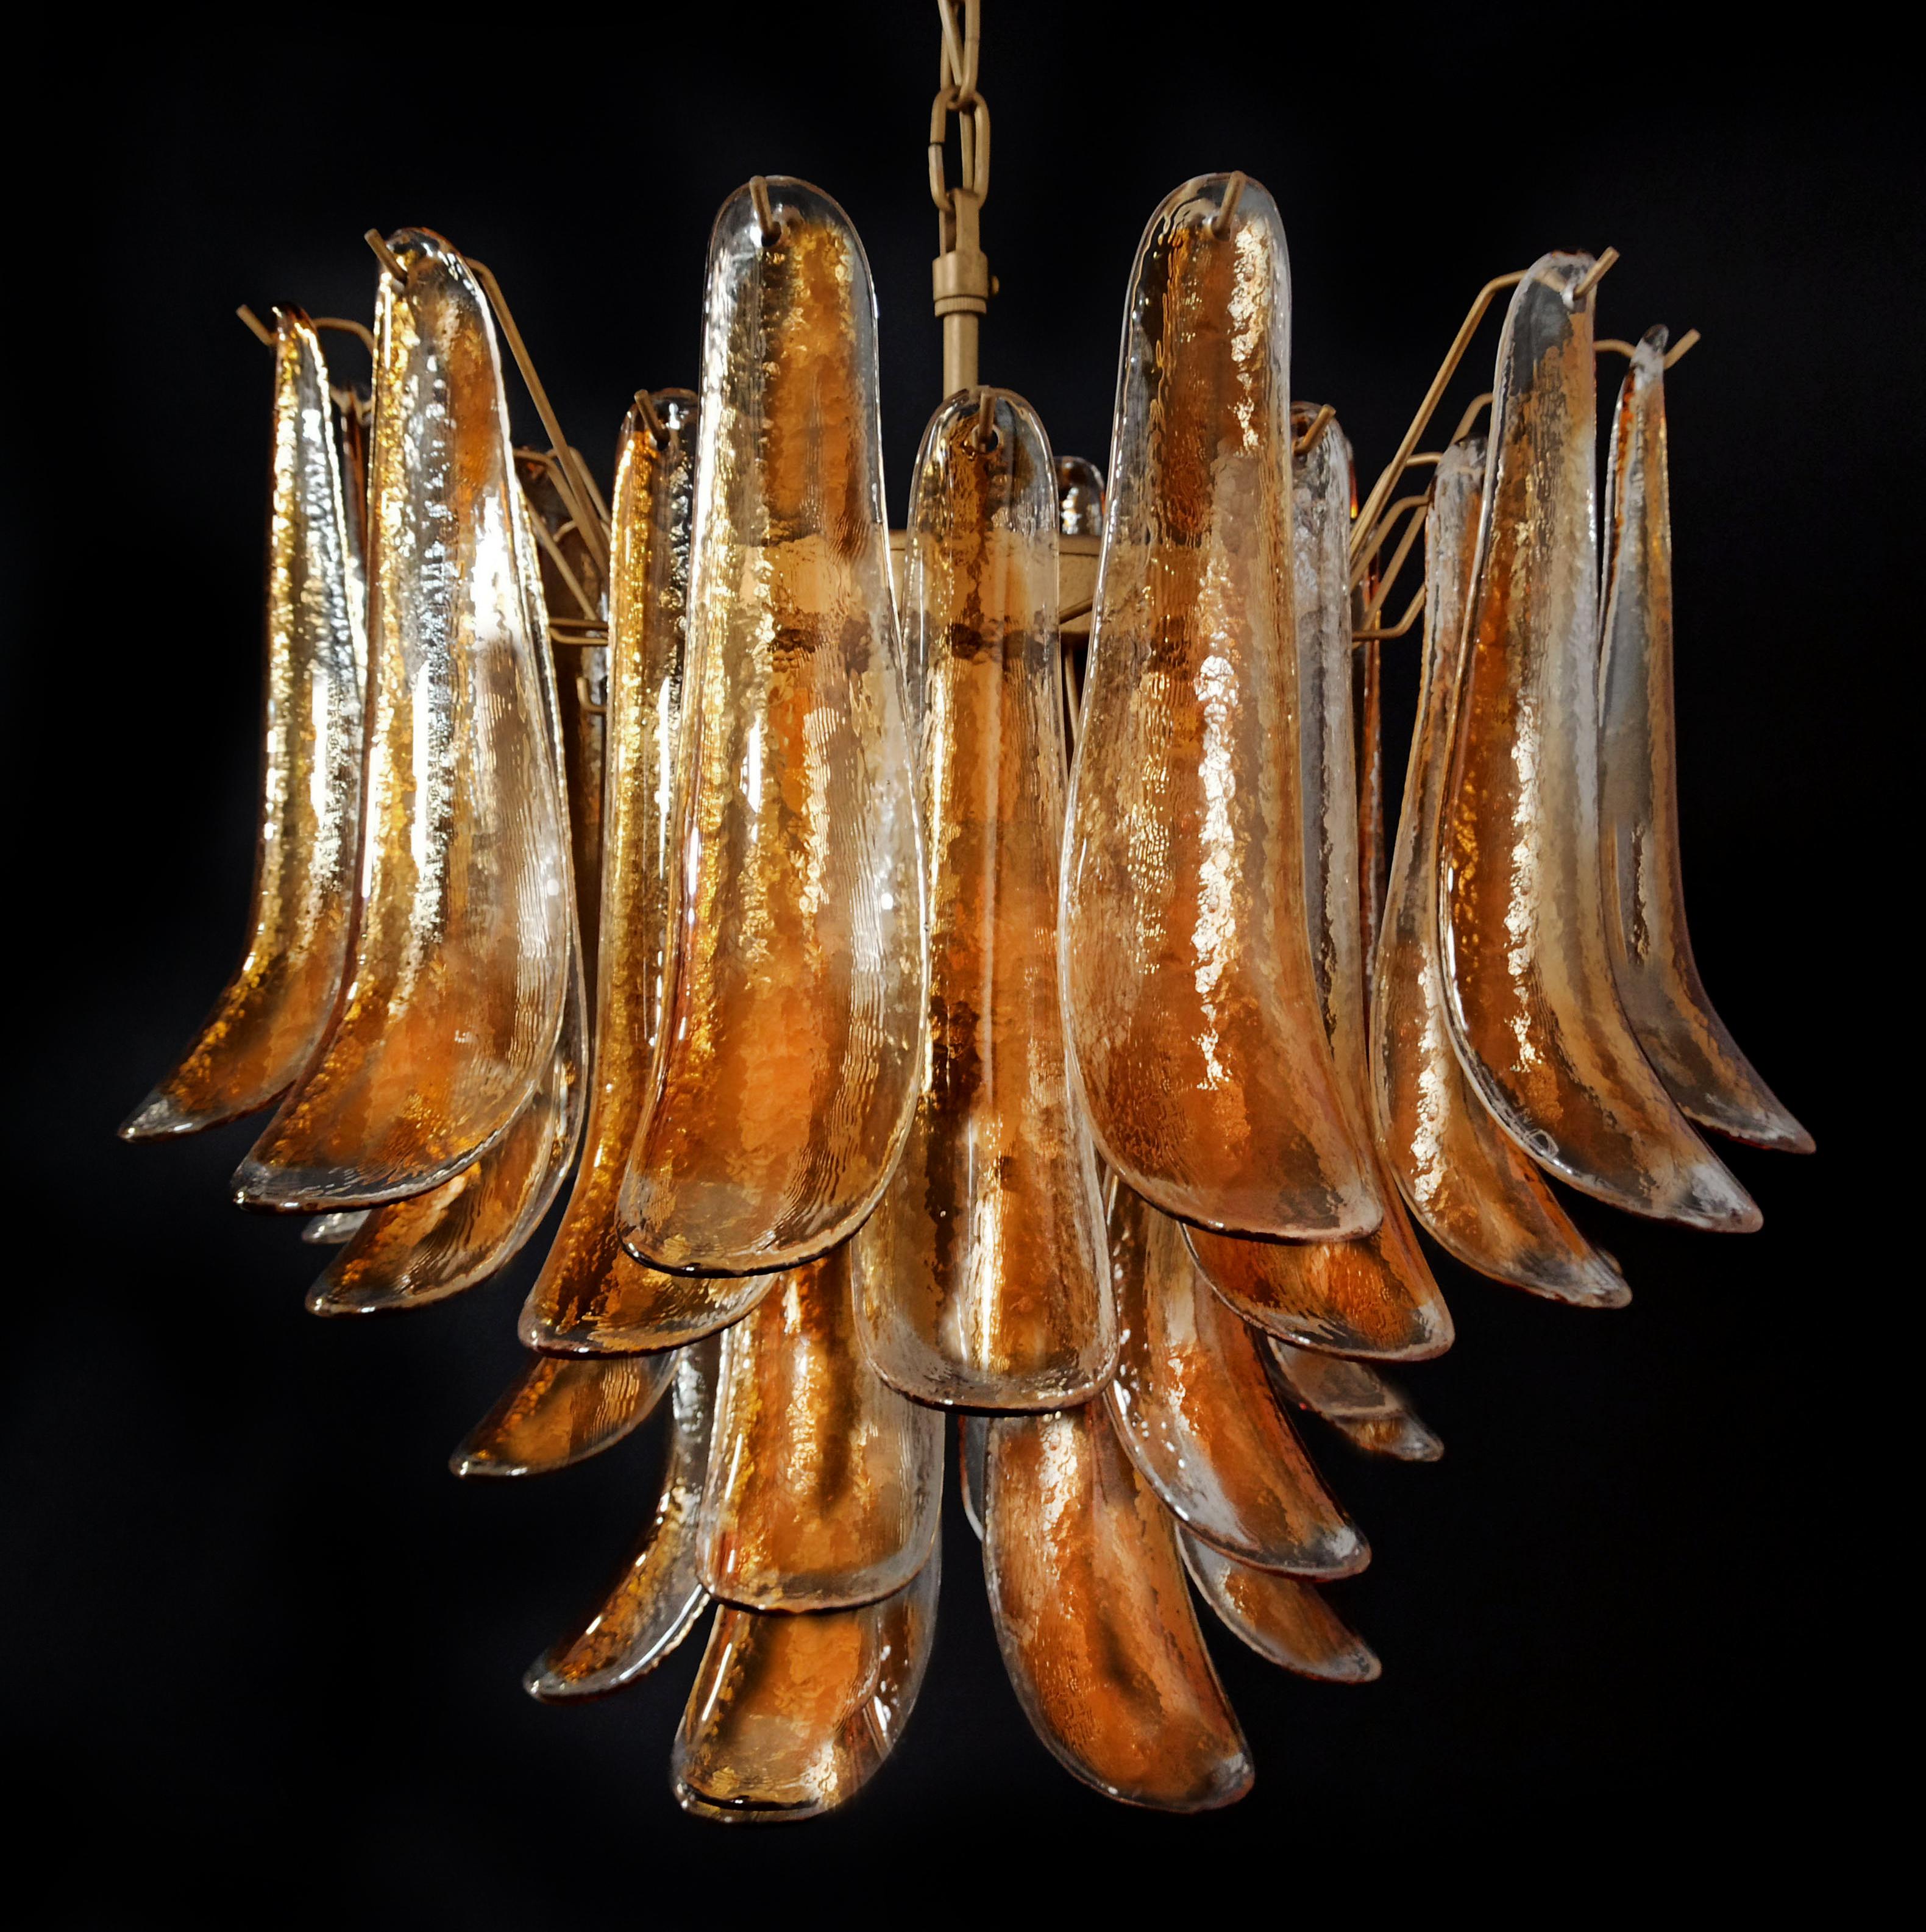 Chandelier with 36 transparent with an amber spot inside glasses, gold painted structure. The glasses are very high quality, the photos do not do the beauty, luster of these glasses.
Period:late XX century
Dimensions:47,25 inches (120 cm) height